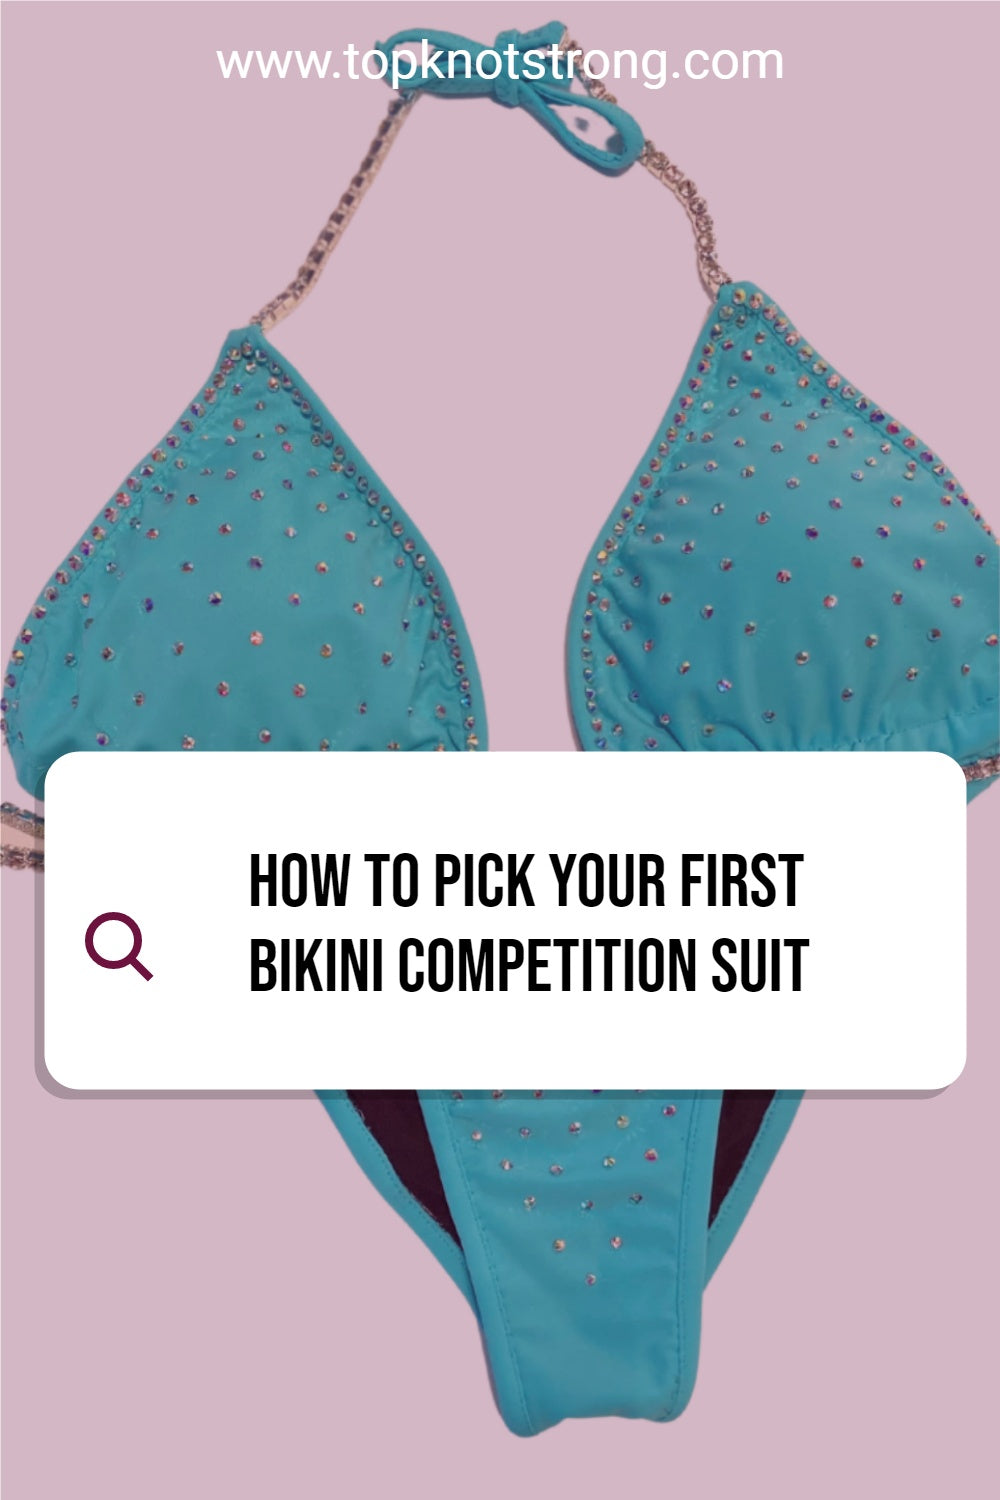 How to Pick Your First Bikini Competition Suit